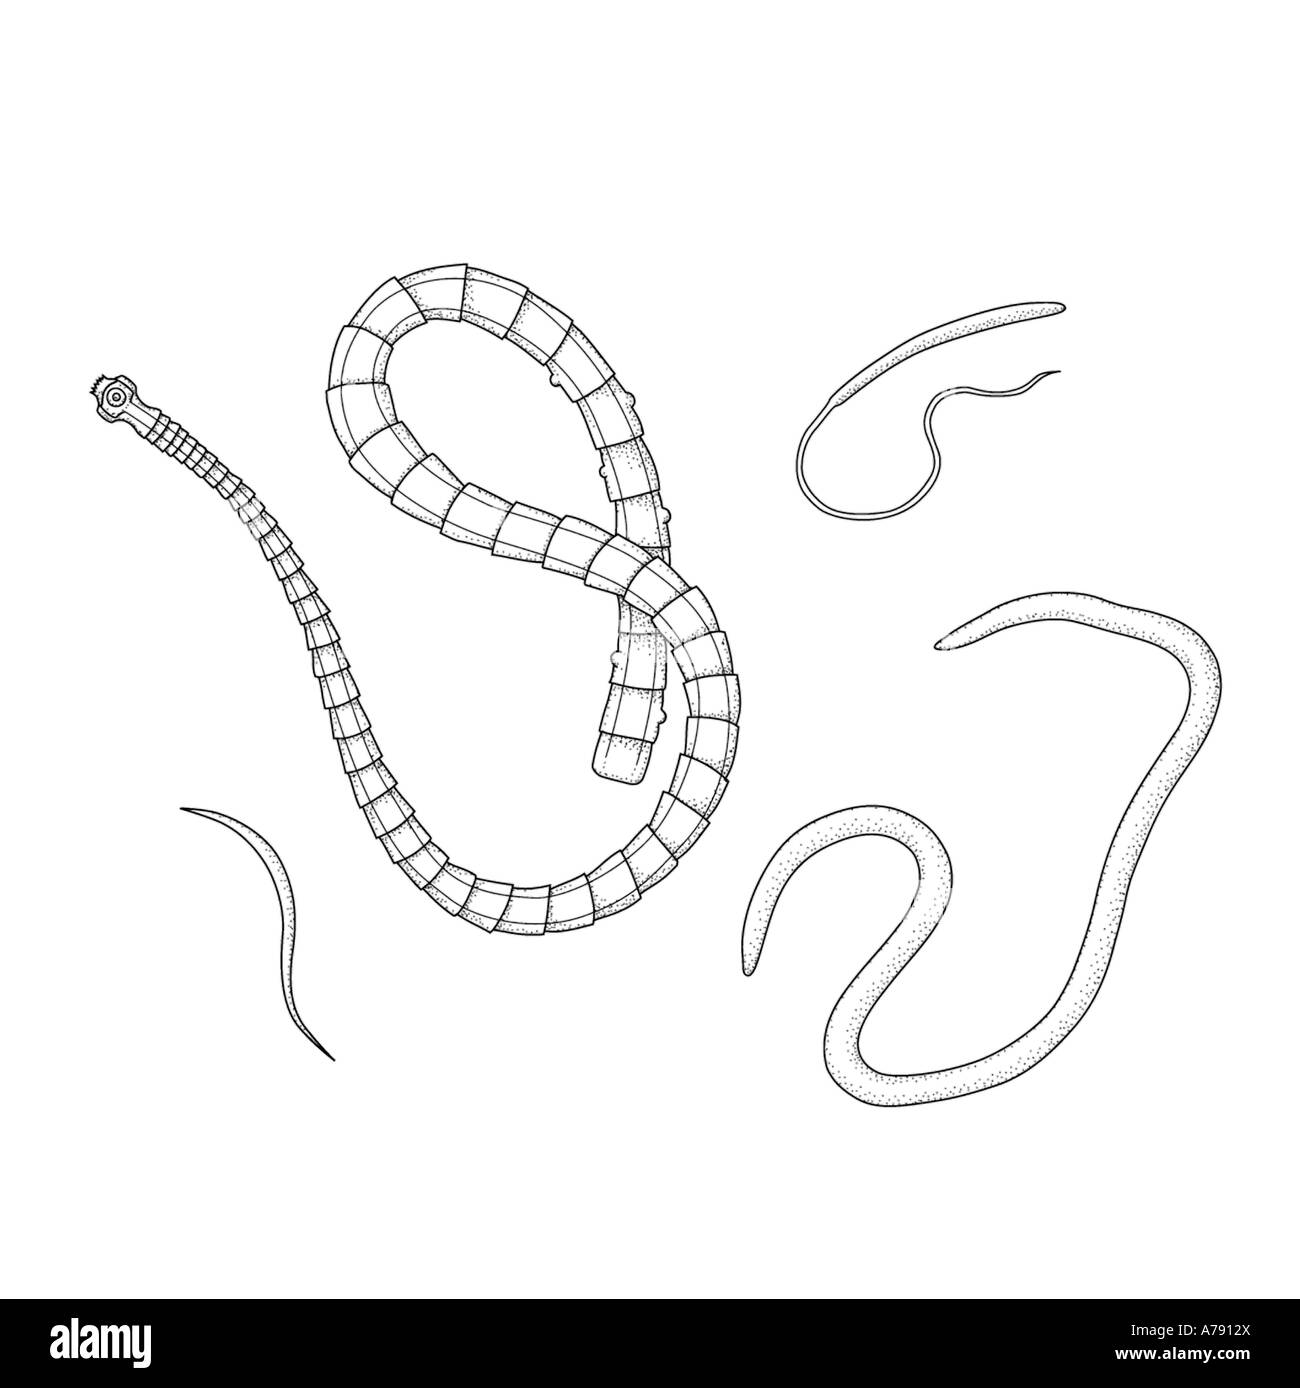 Different Types Of Parasitic Worms